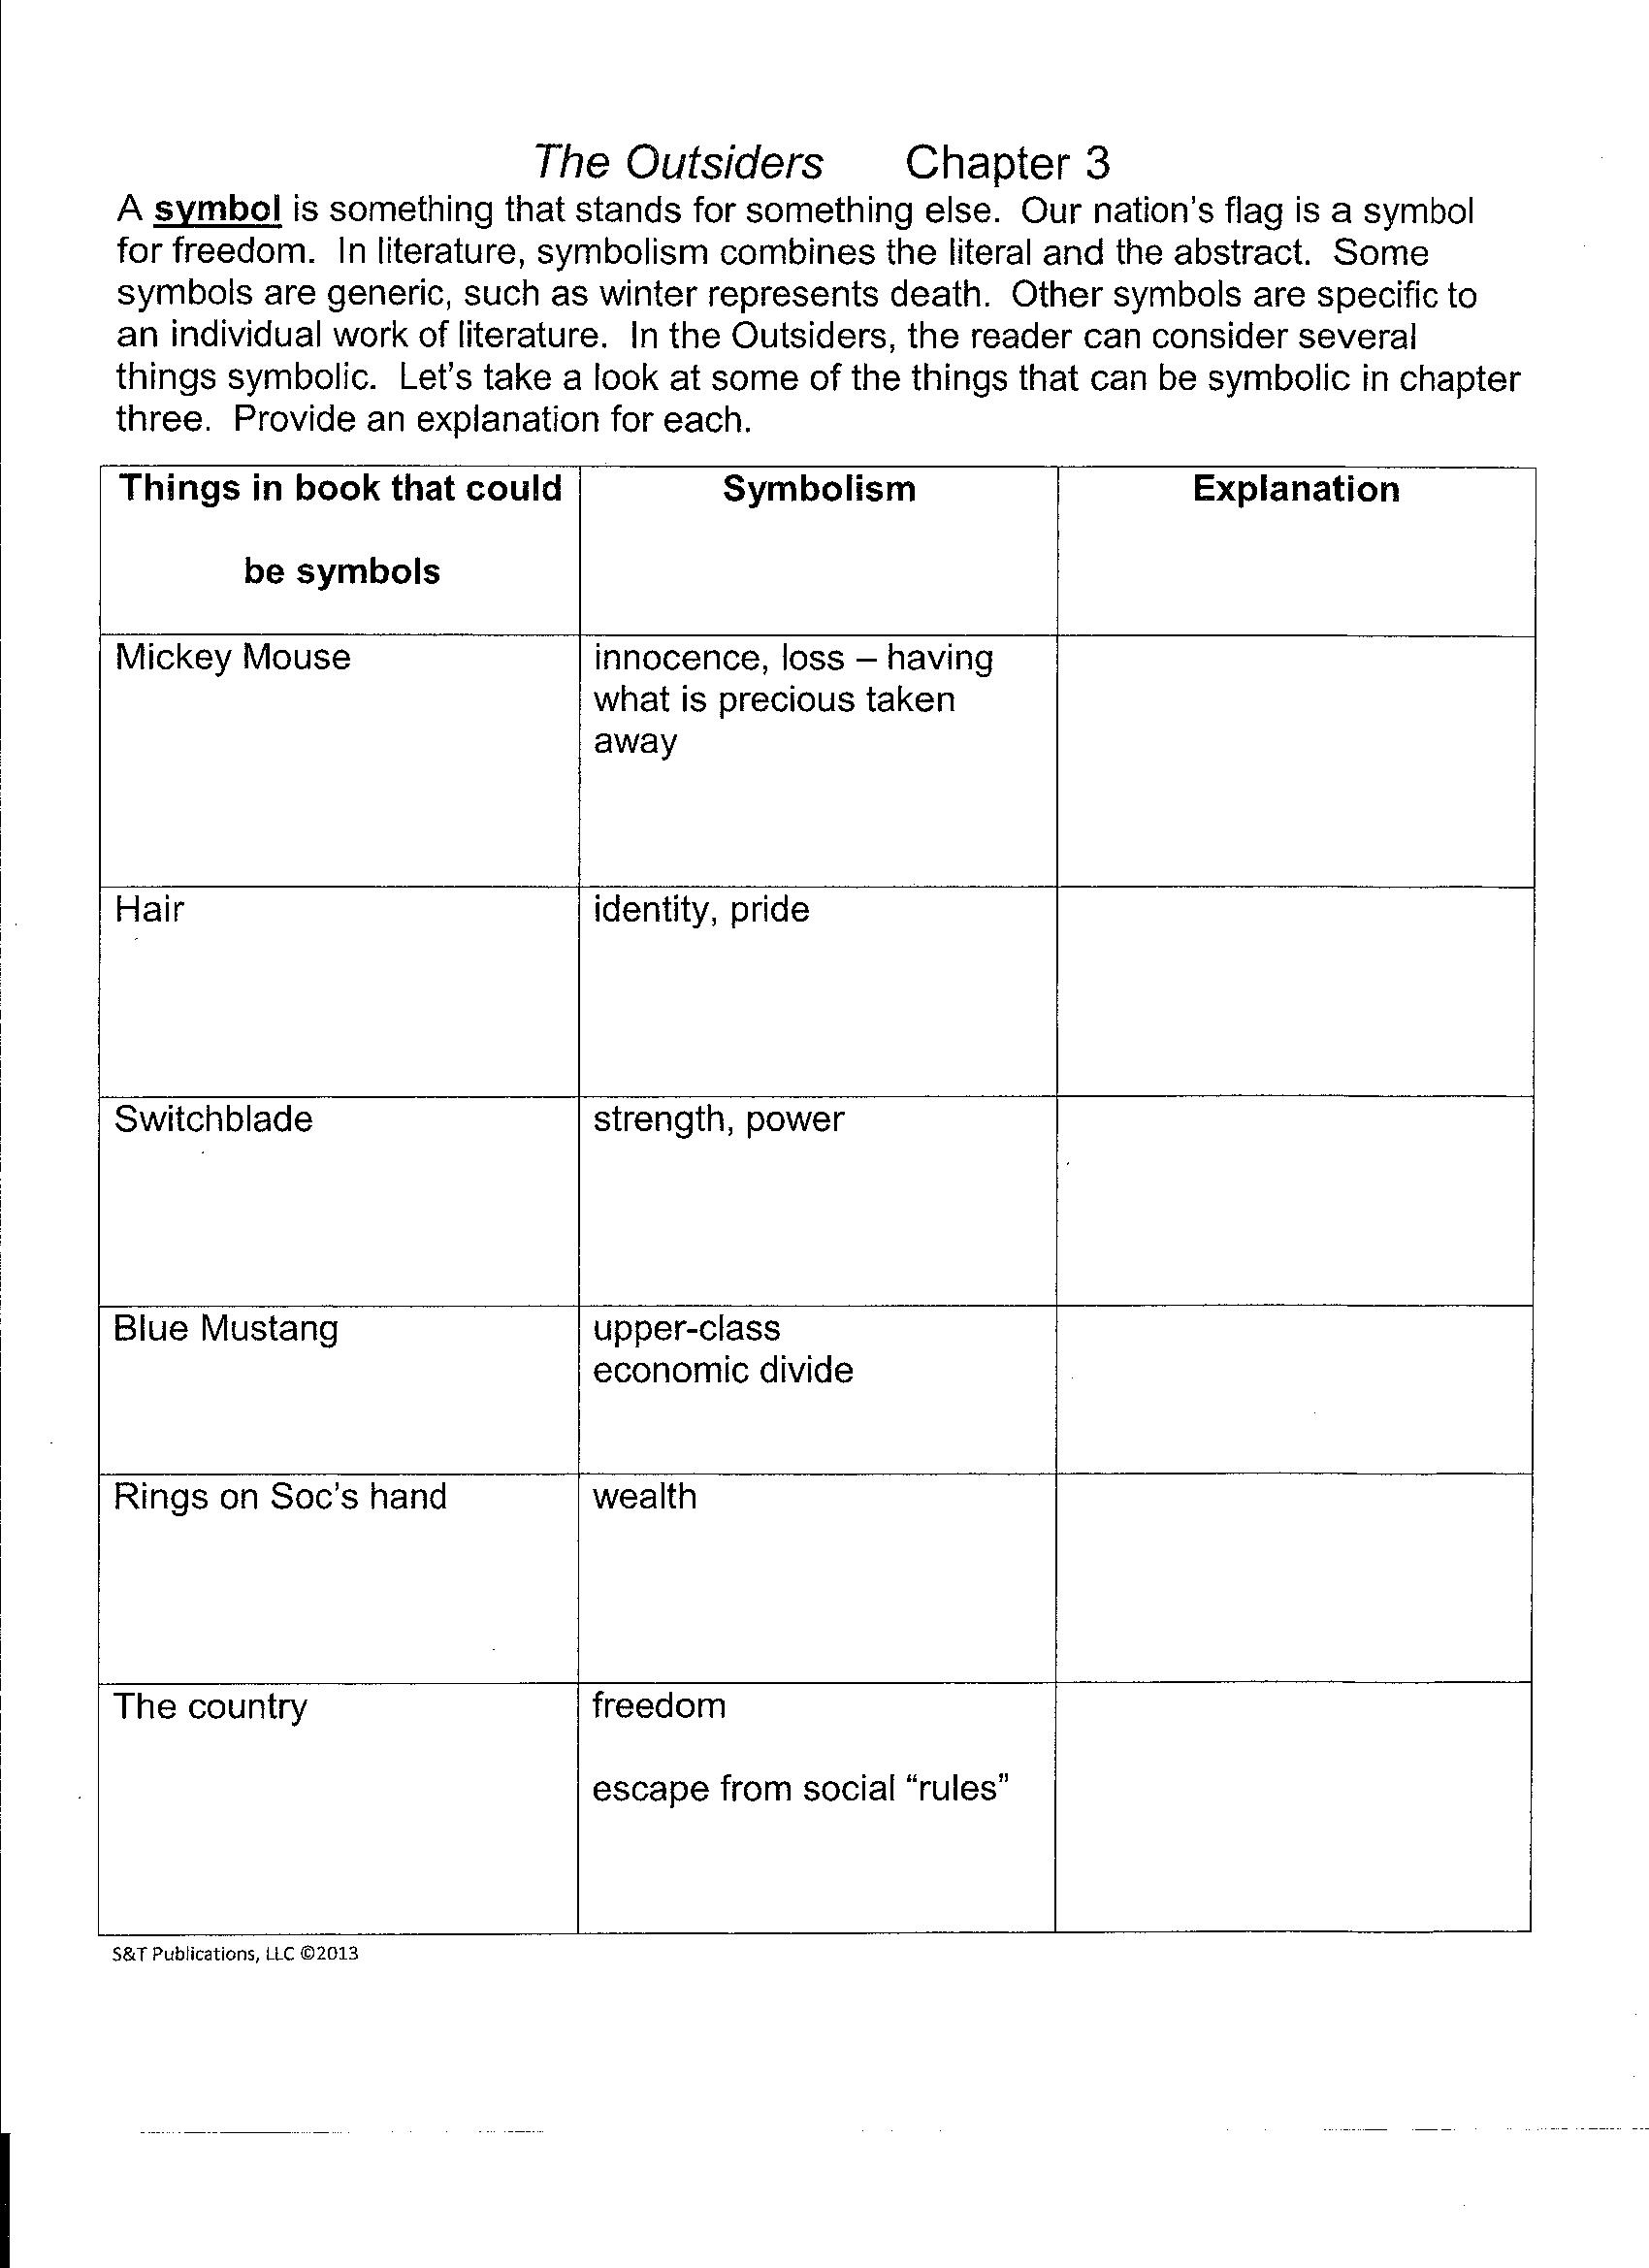 27 The Outsiders Worksheet Answers - Worksheet Project List